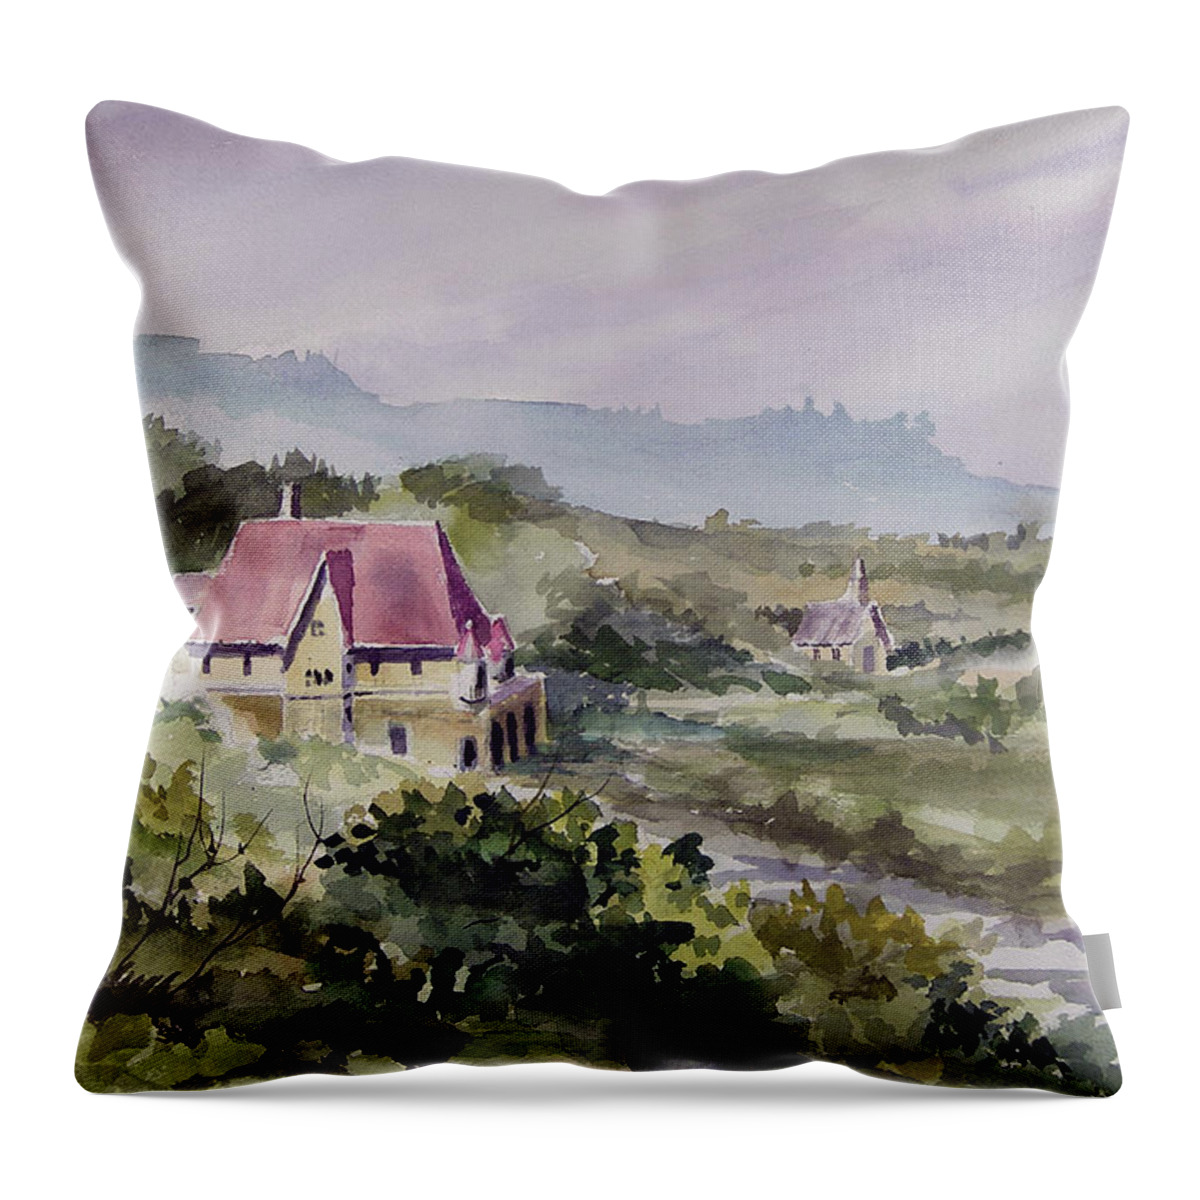 Landscape Throw Pillow featuring the painting The Red Roof by Sam Sidders